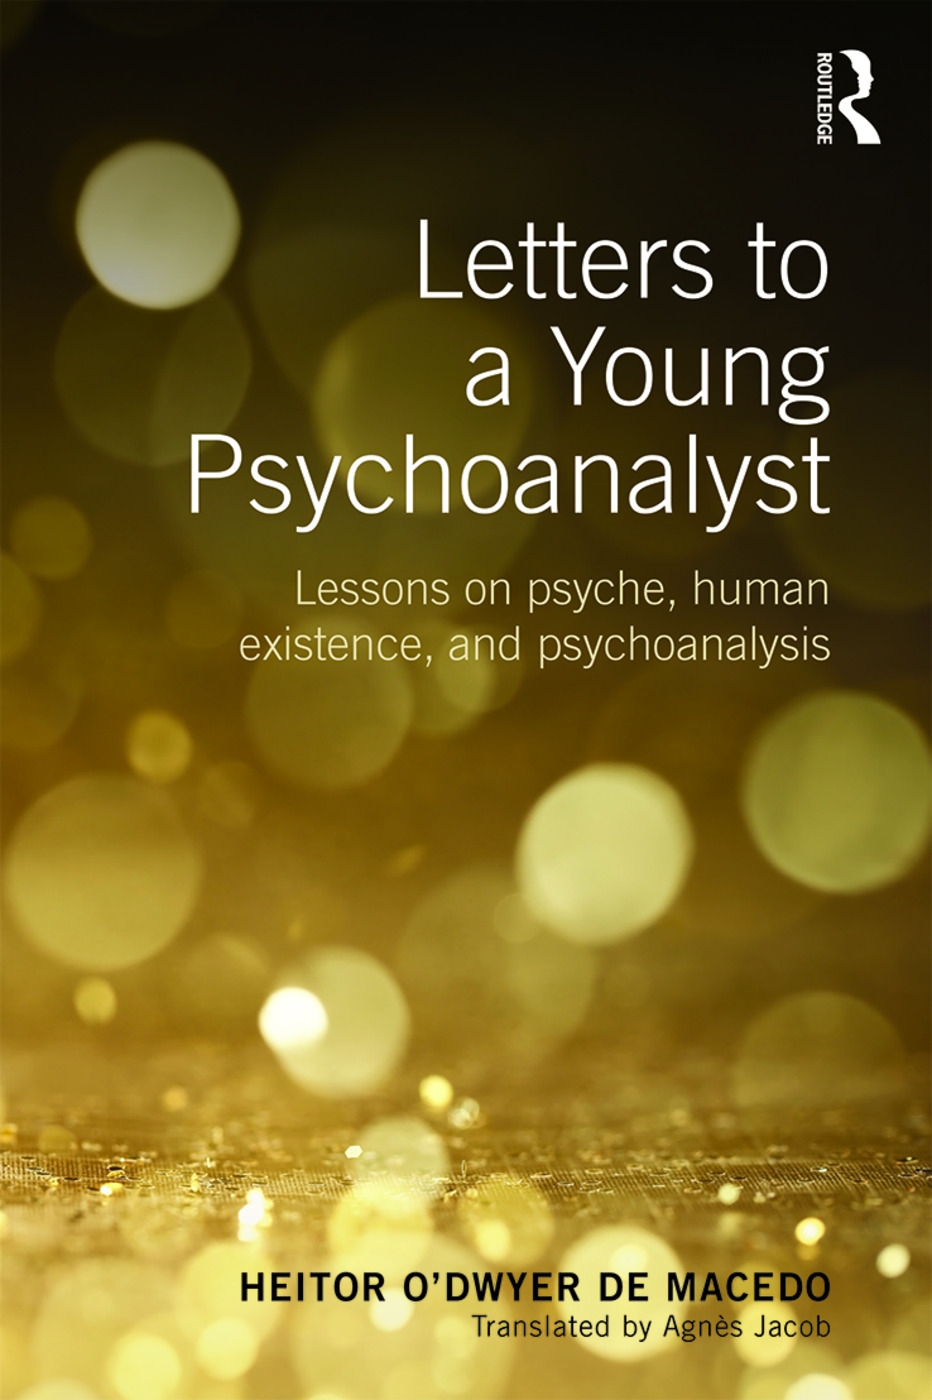 Letters to a Young Psychoanalyst: Lessons on Psyche, Human Existence, and Psychoanalysis